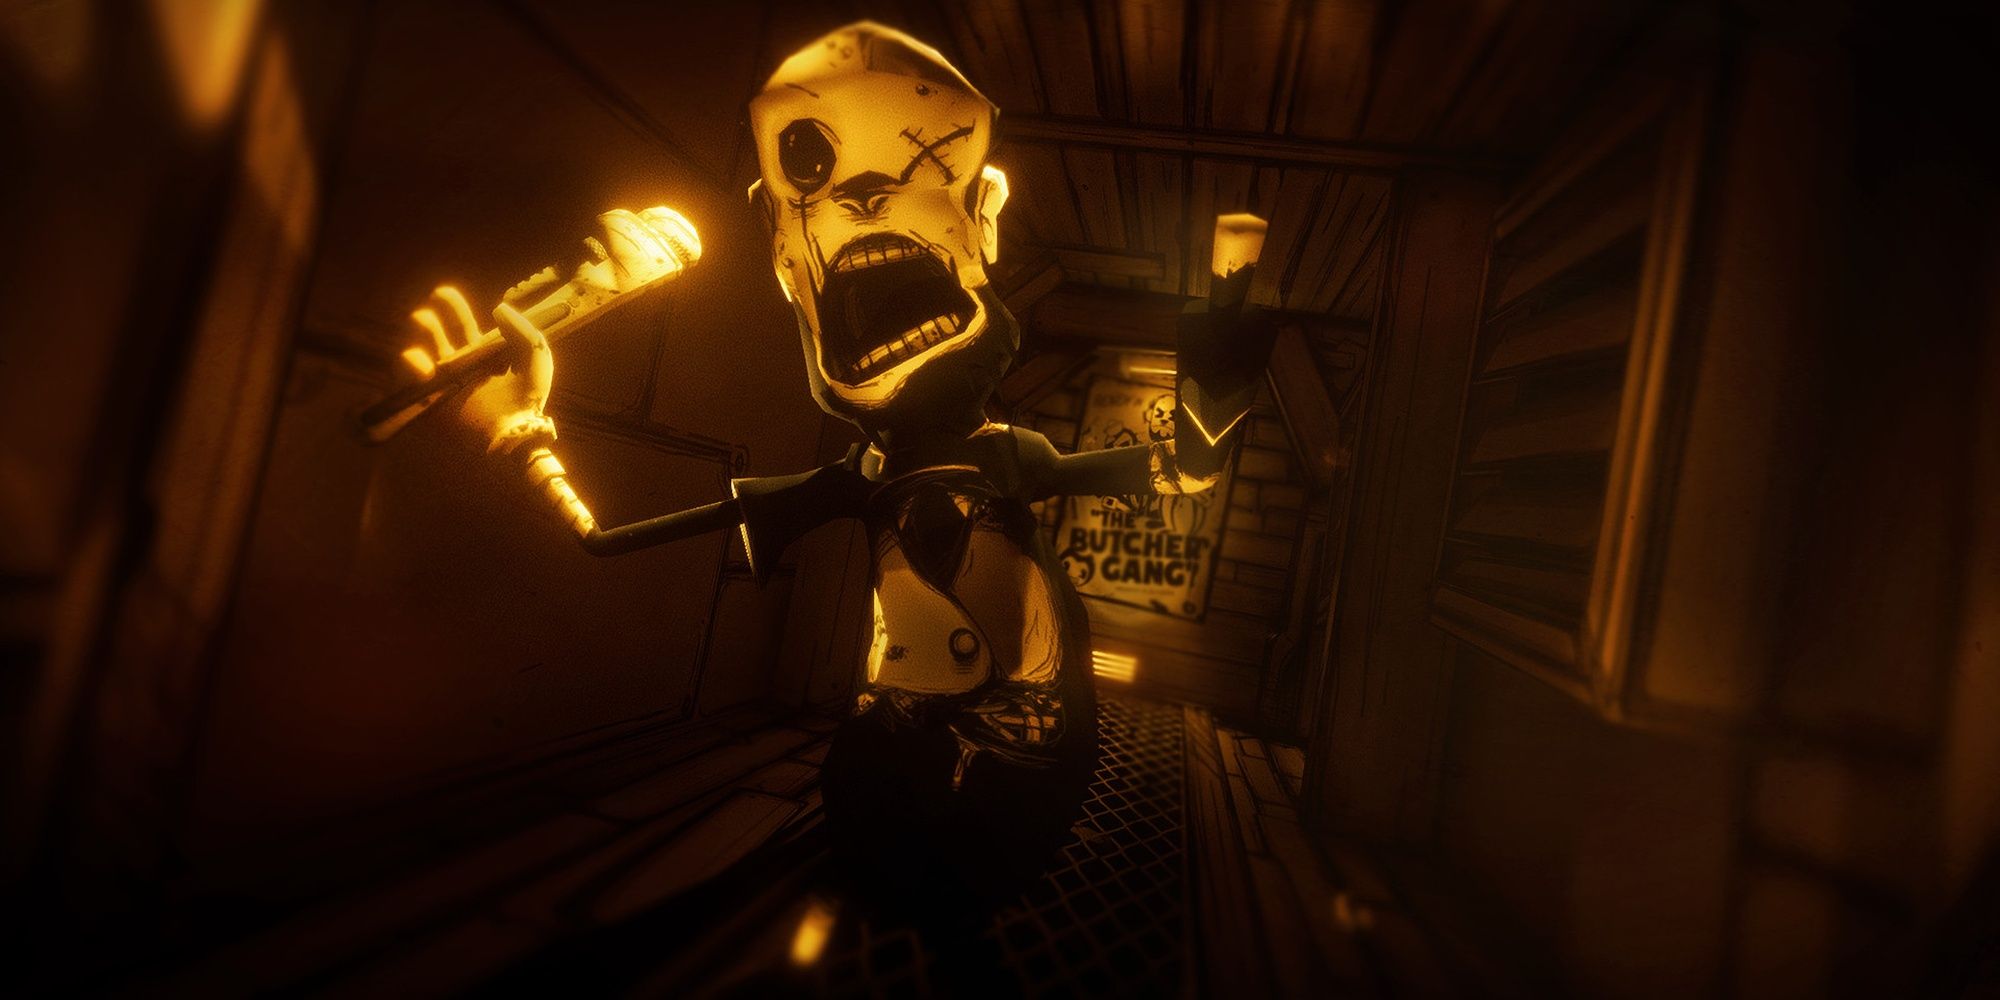 Bendy And The Ink Machine: Being Chased By An Ink Demon